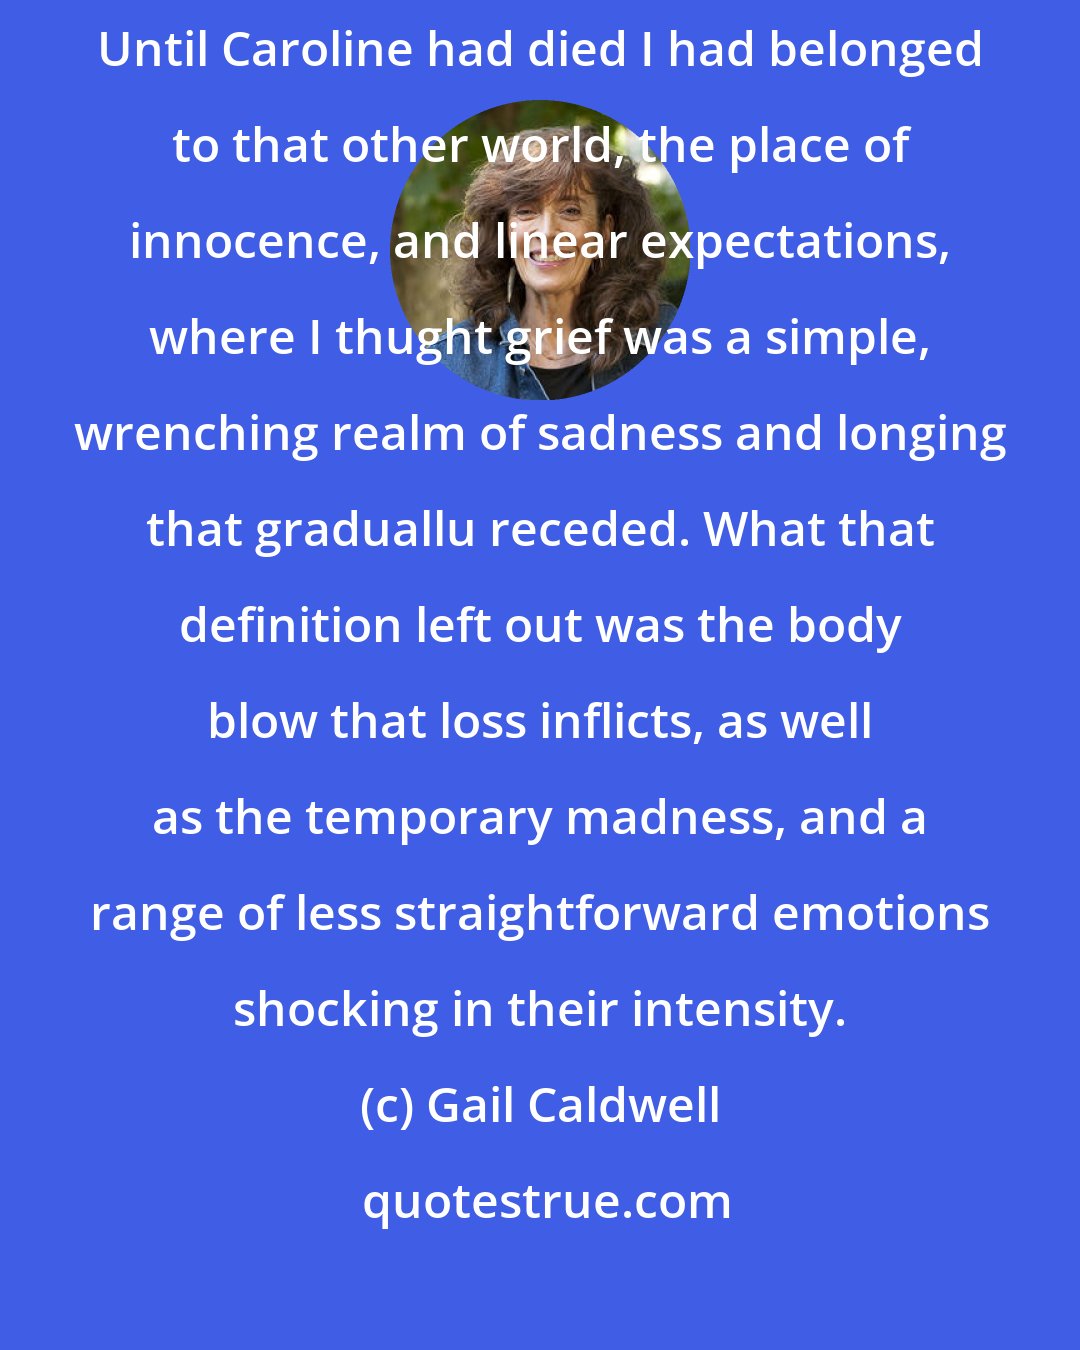 Gail Caldwell: The only education in grief that any of us ever gets is a crash course. Until Caroline had died I had belonged to that other world, the place of innocence, and linear expectations, where I thught grief was a simple, wrenching realm of sadness and longing that graduallu receded. What that definition left out was the body blow that loss inflicts, as well as the temporary madness, and a range of less straightforward emotions shocking in their intensity.